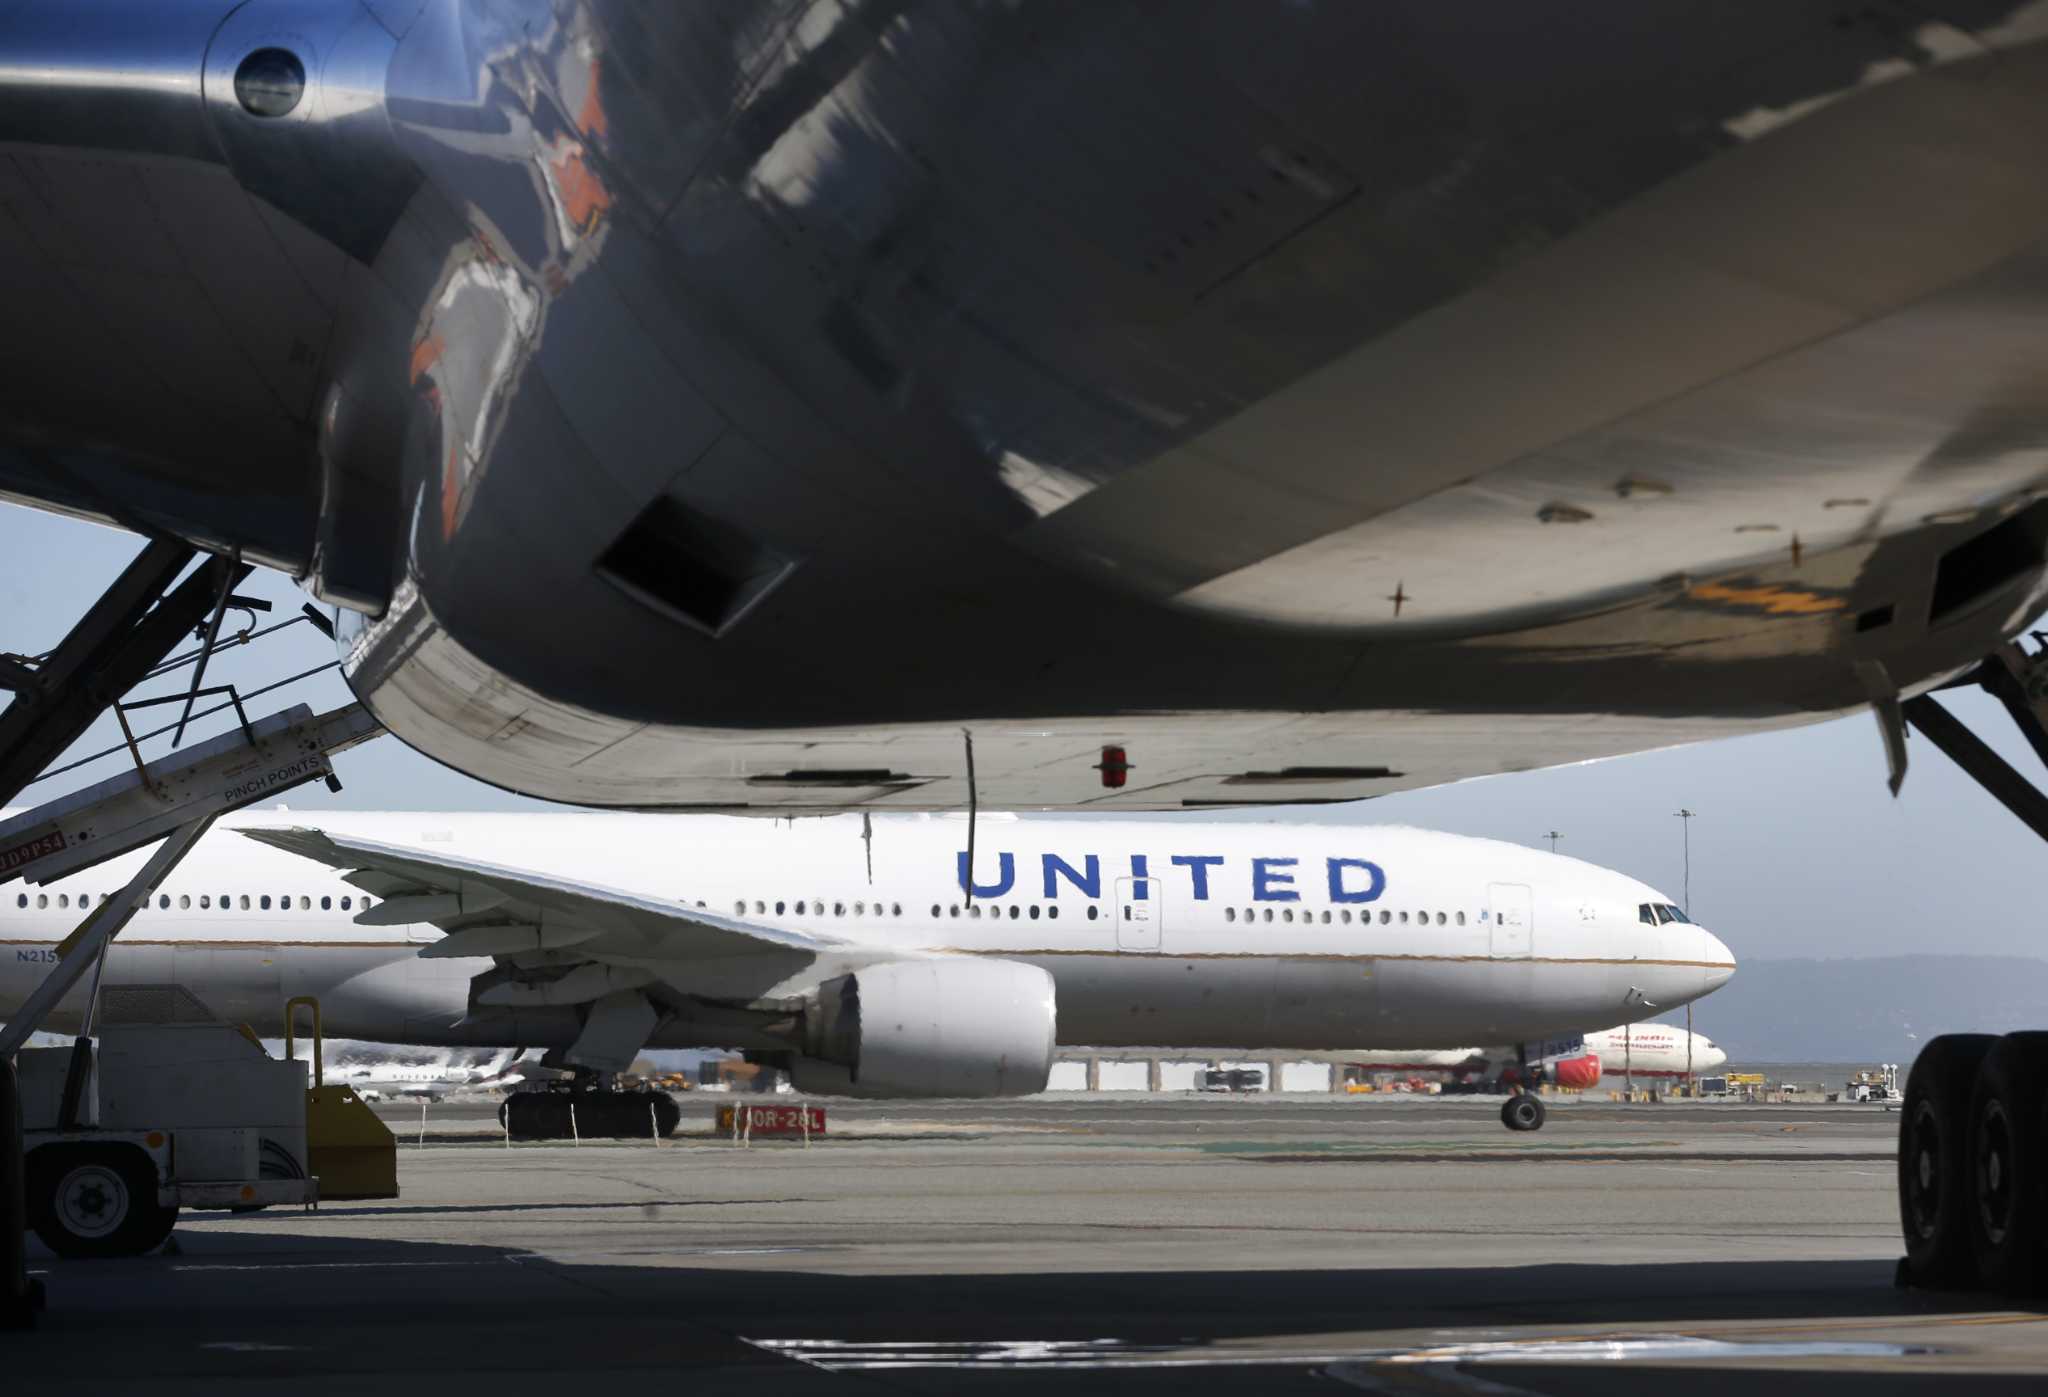 United flight from Hawaii to SFO nearly plunged into ocean: report